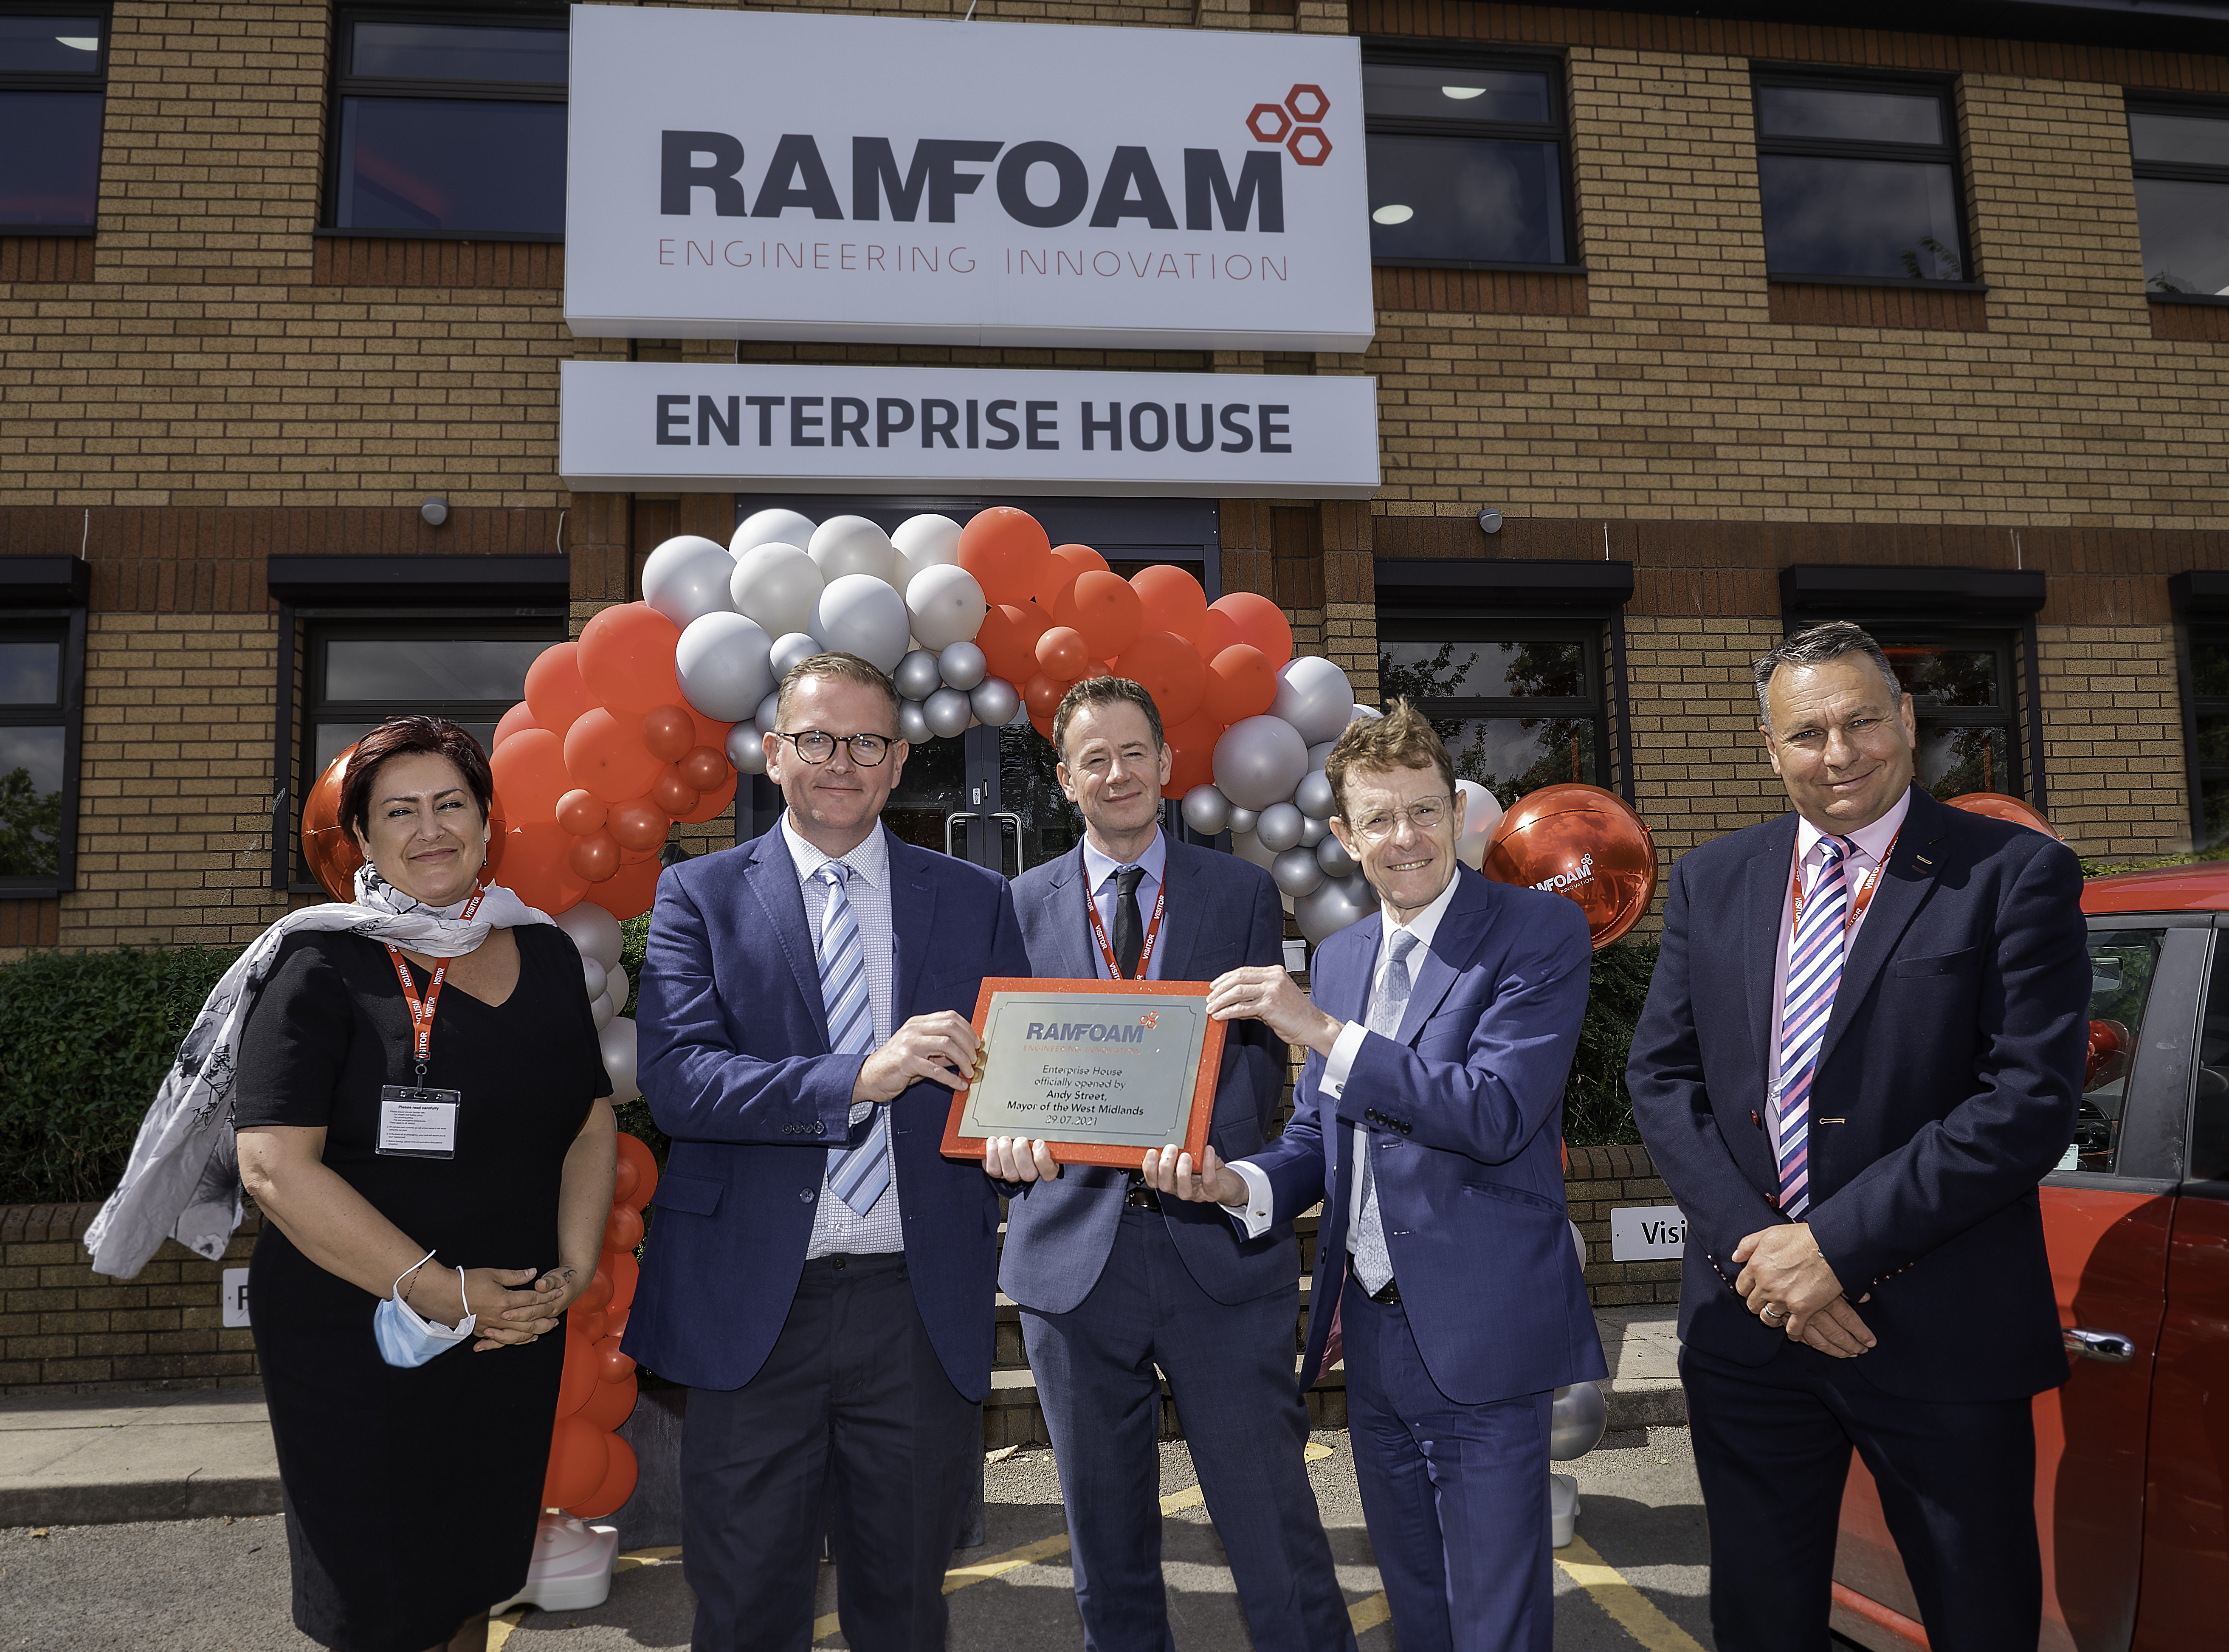 Image (L-R): Anne Boyd, Chief Executive at Stoke-on-Trent and Staffordshire LEP, Tim Mulqueen, Director at Ramfoam, Mark Swift, Head of WMG SME Group, University of Warwick, Andy Street, Mayor of the West Midlands and Craig Humphrey, Managing Director at the CW LEP Growth Hub, meet at the Ramfoam Enterprise House.